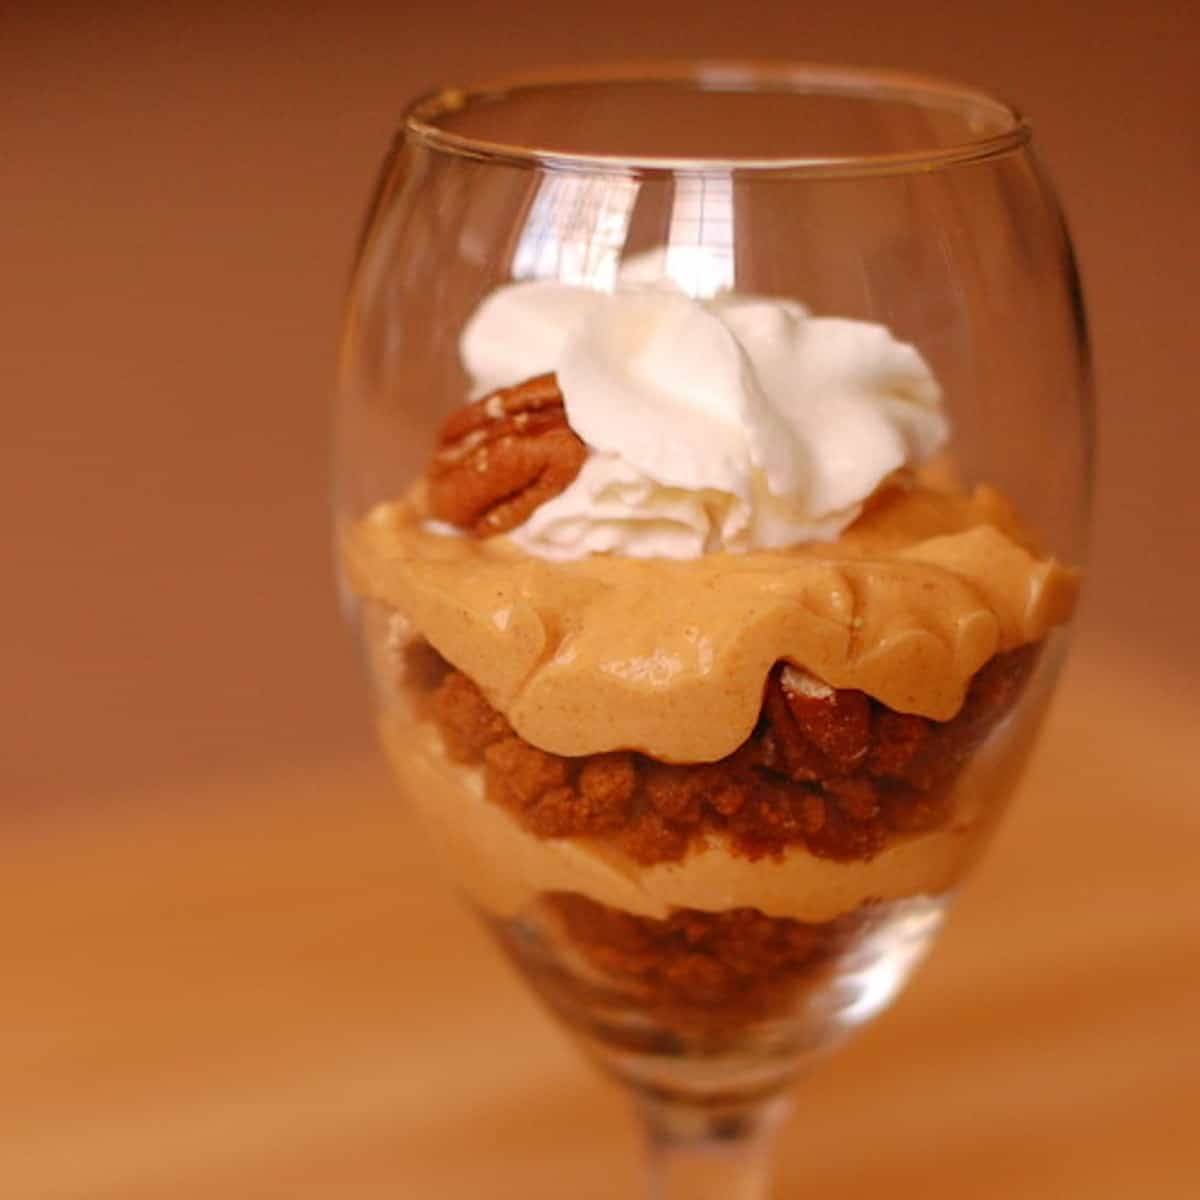 Pumpkin pecan cheesecake parfait in a glass topped with whipped cream.